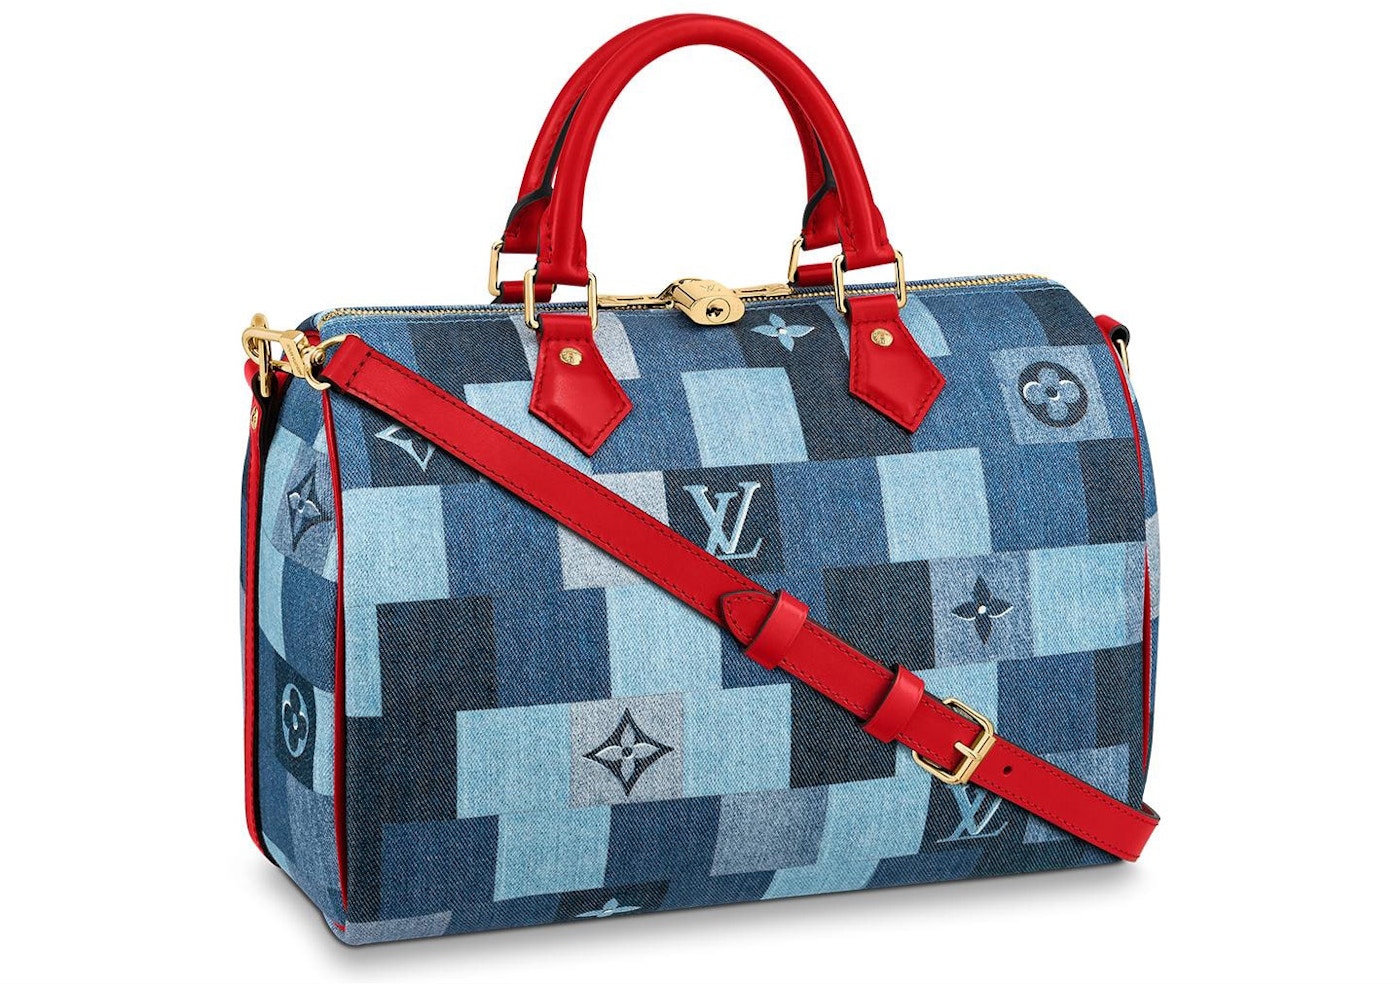 Louis Speedy Bandouliere 30 Denim Check Blue/Red in Denim Canvas/Cowhide Leather with